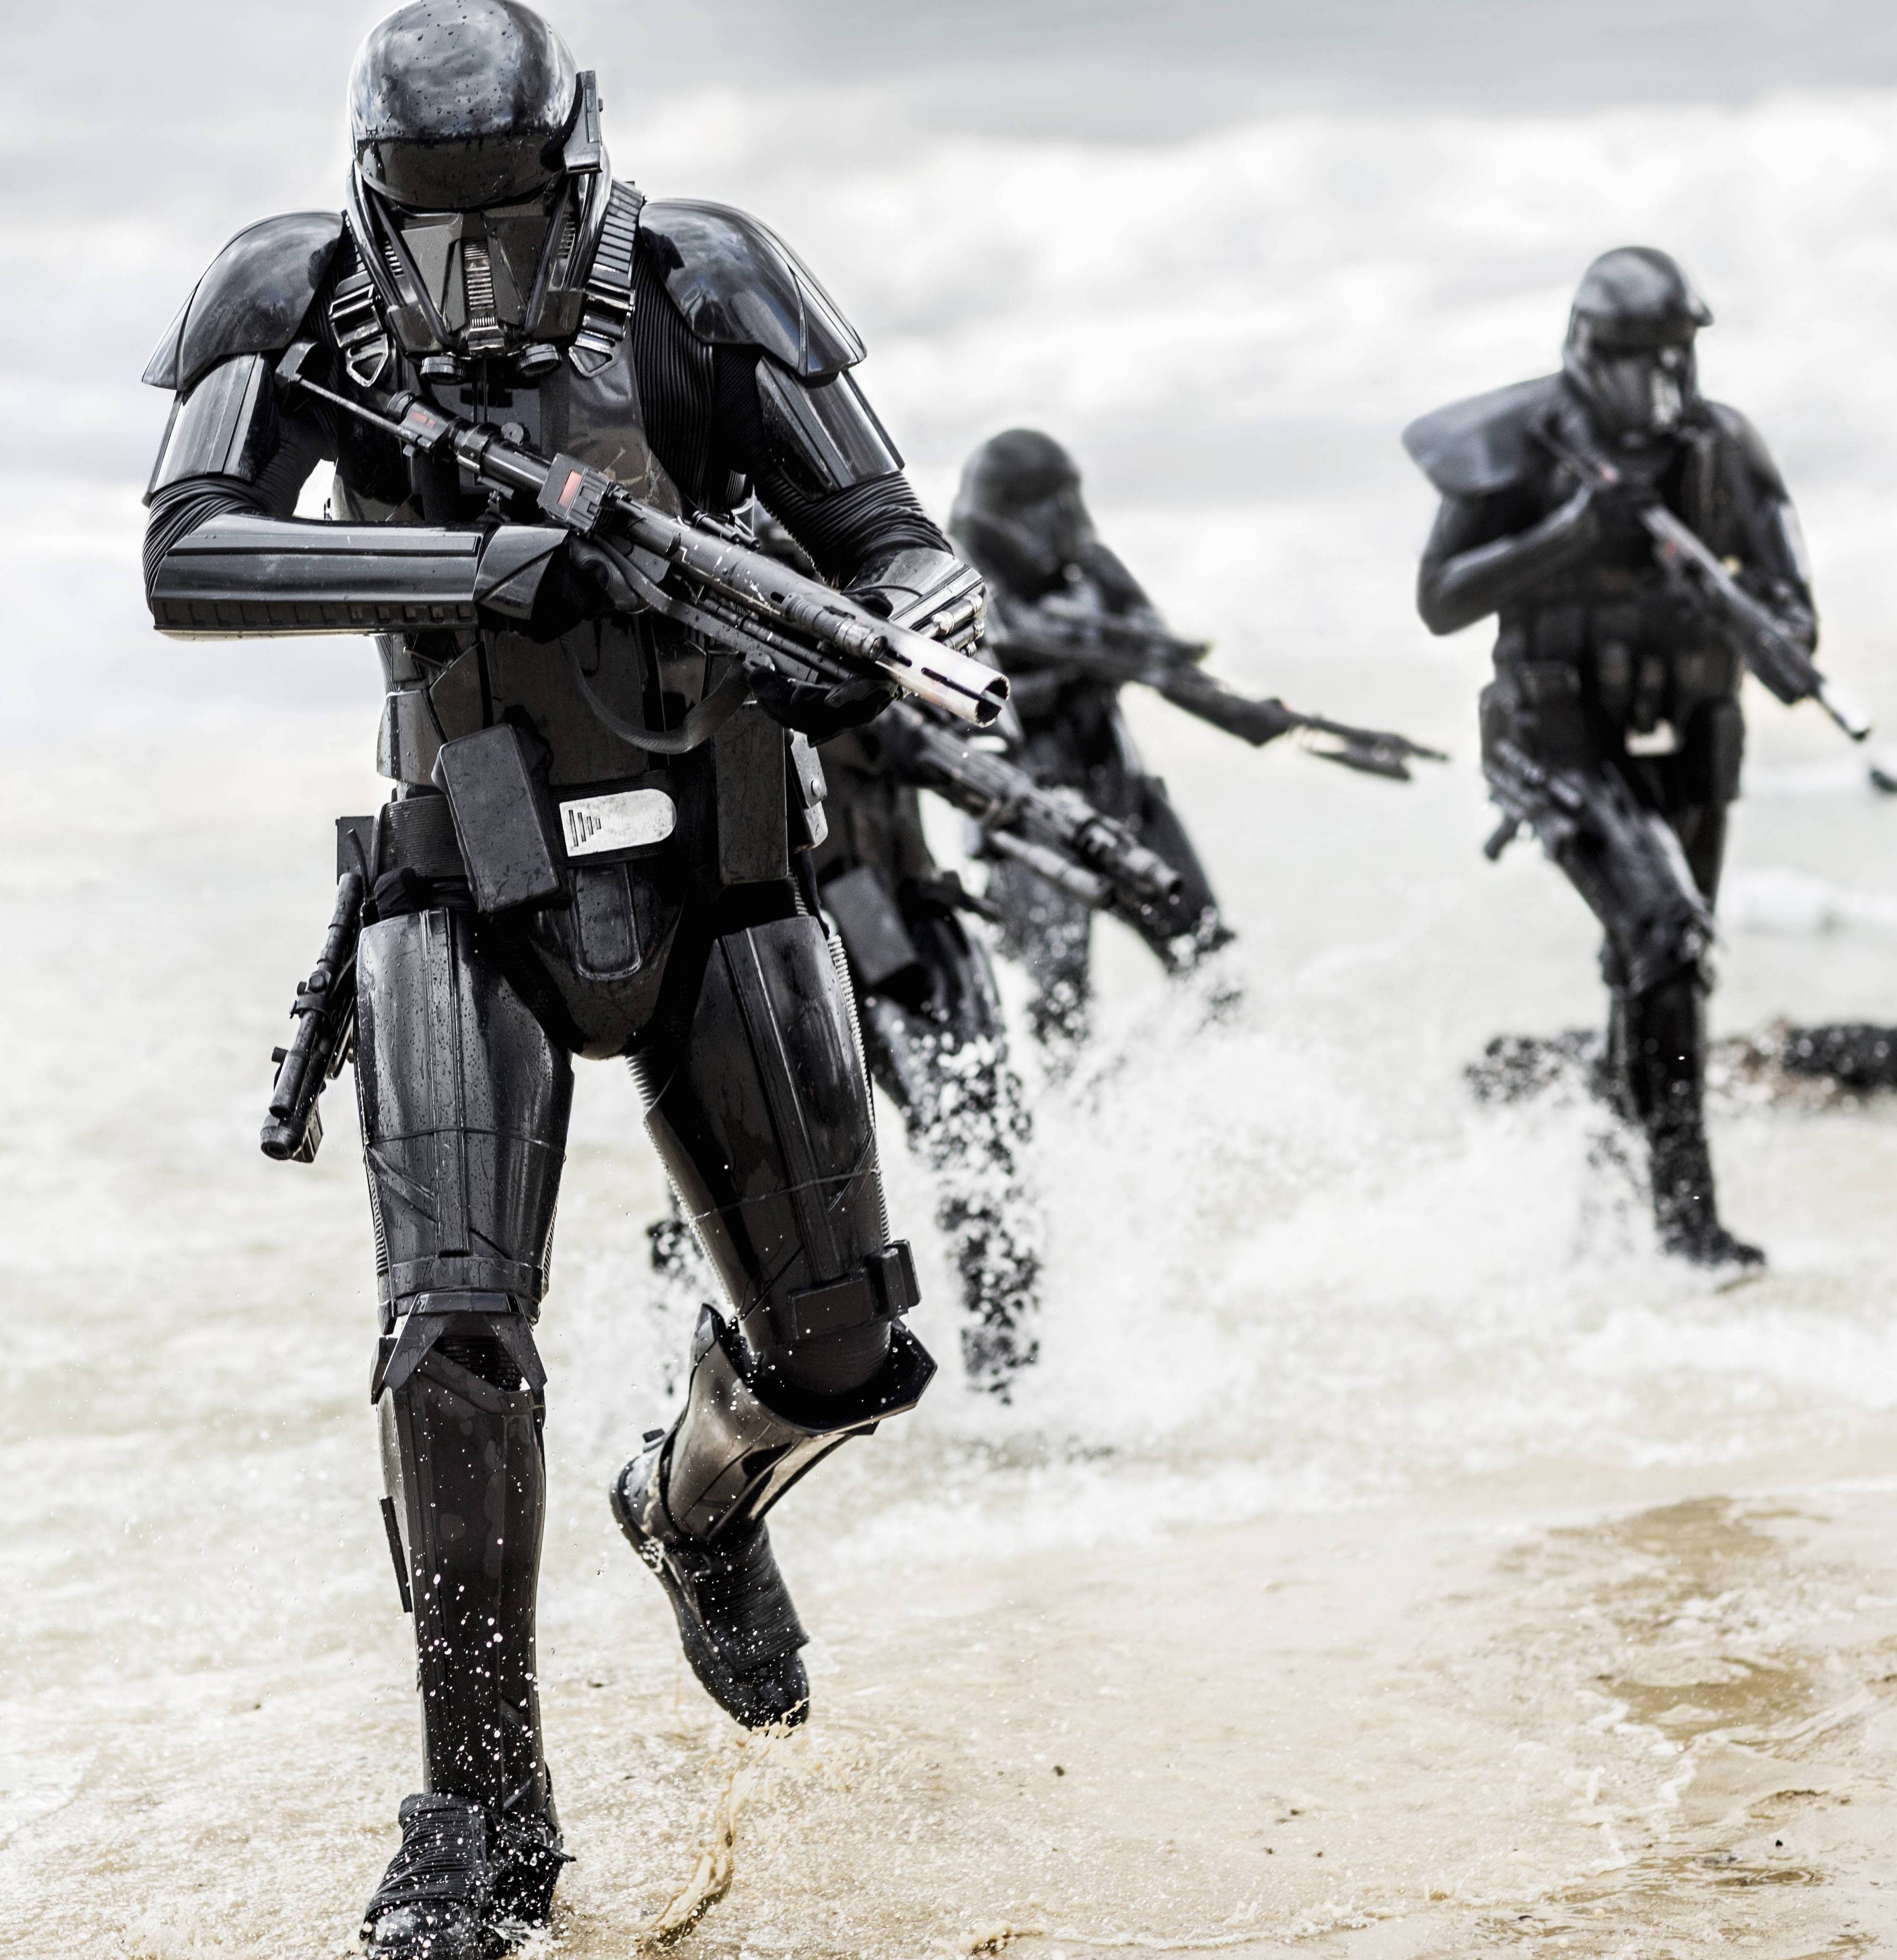 Imperial Death Trooper, water, Star Wars, Rogue One: A Star Wars Story